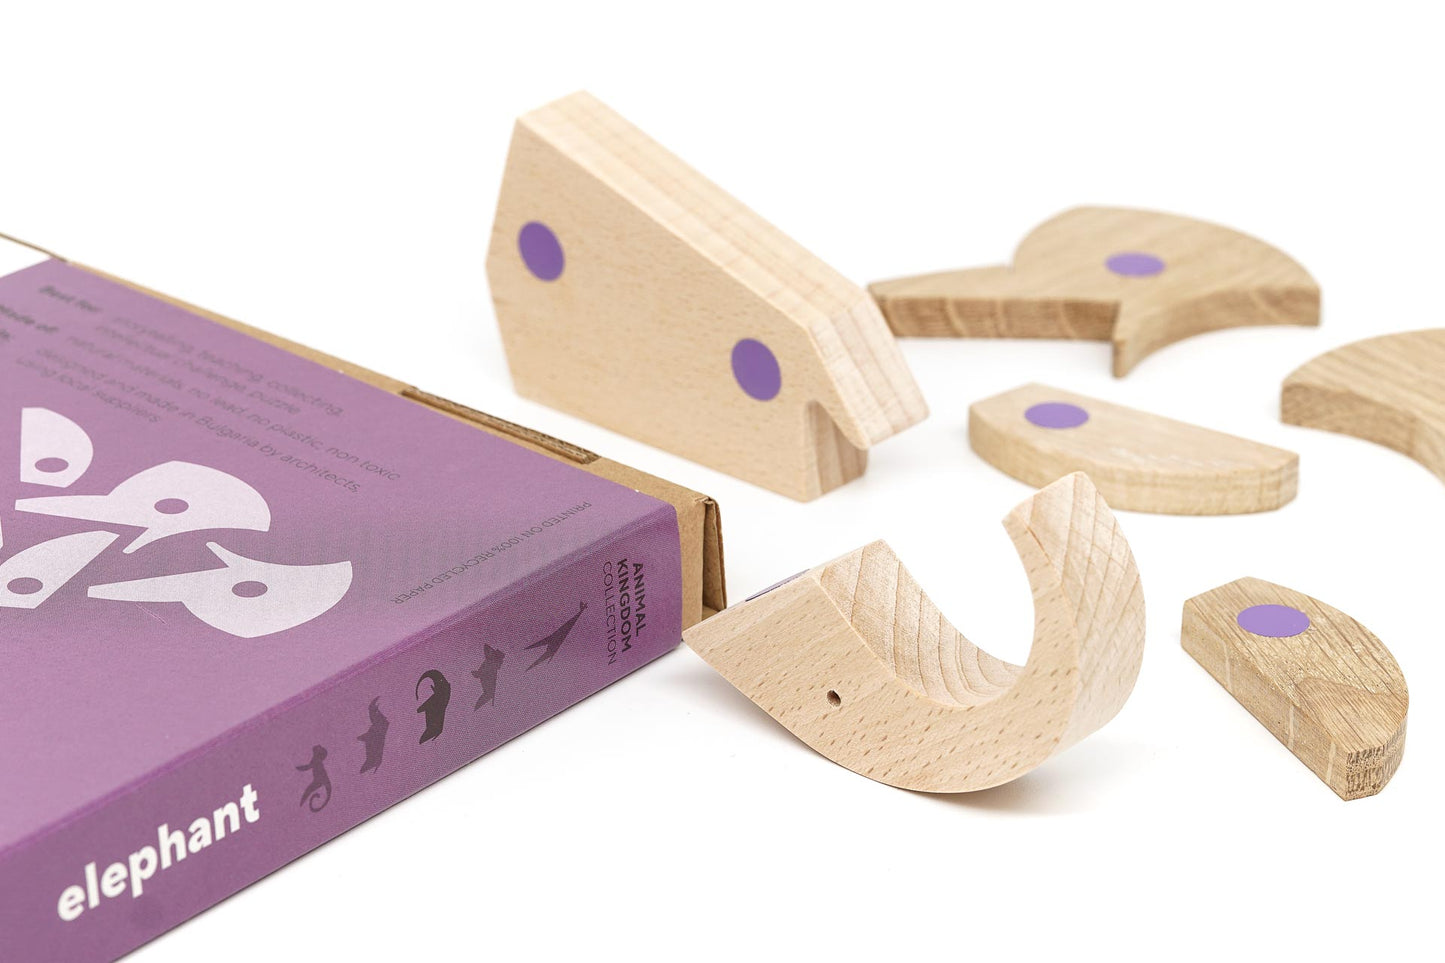 Assemble a wooden magnetic toy elephant using various forms and shapes